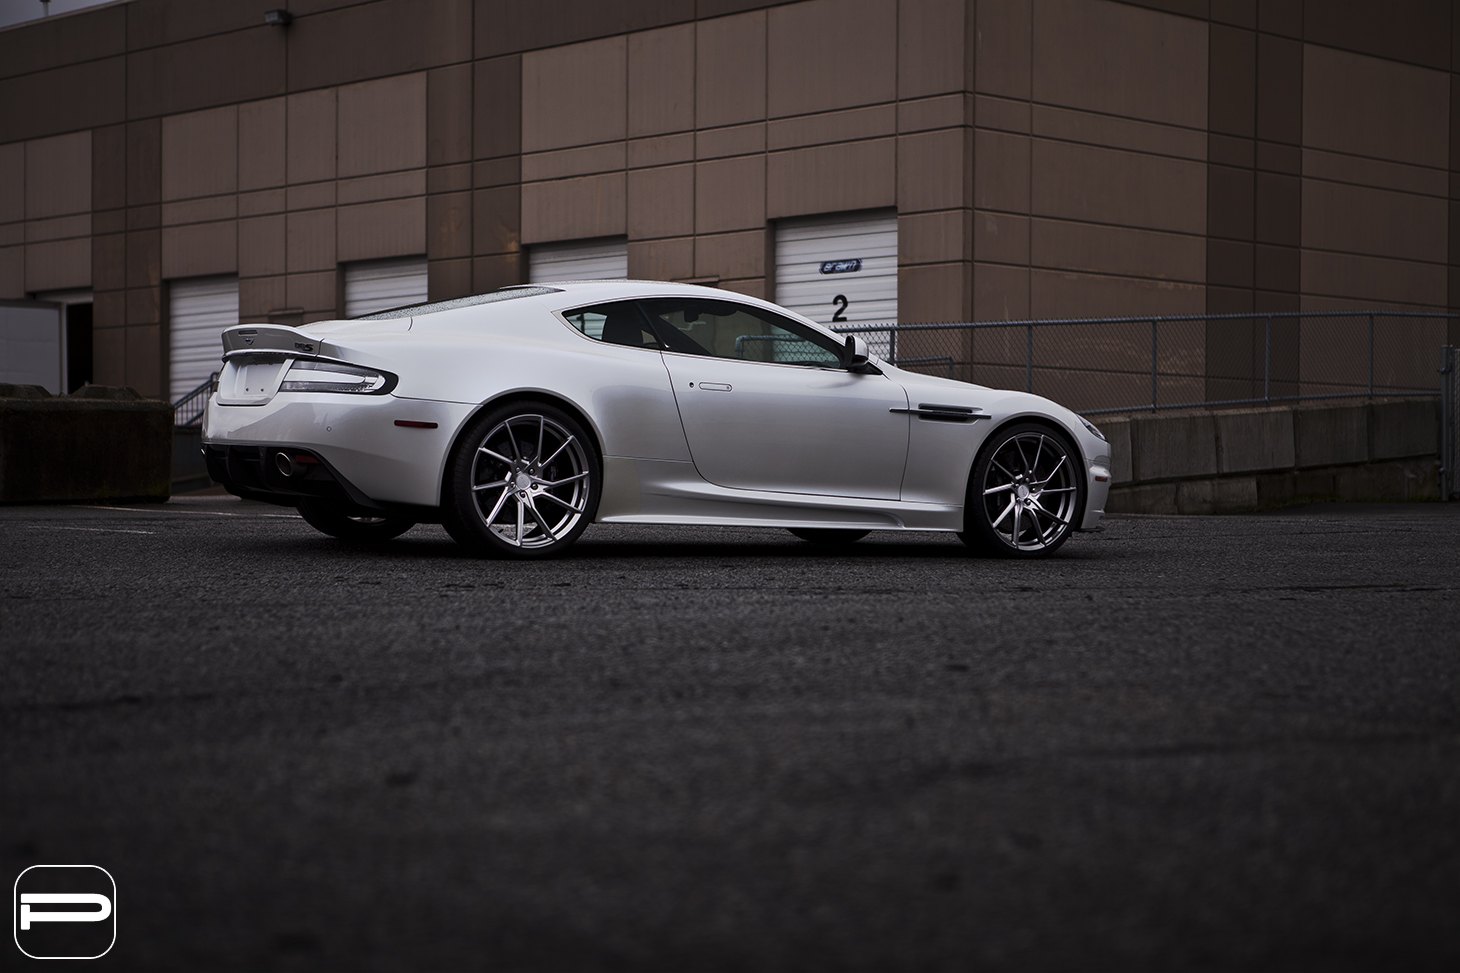 Aftermarket Side Skirts on White Aston Martin DBS - Photo by PUR Wheels